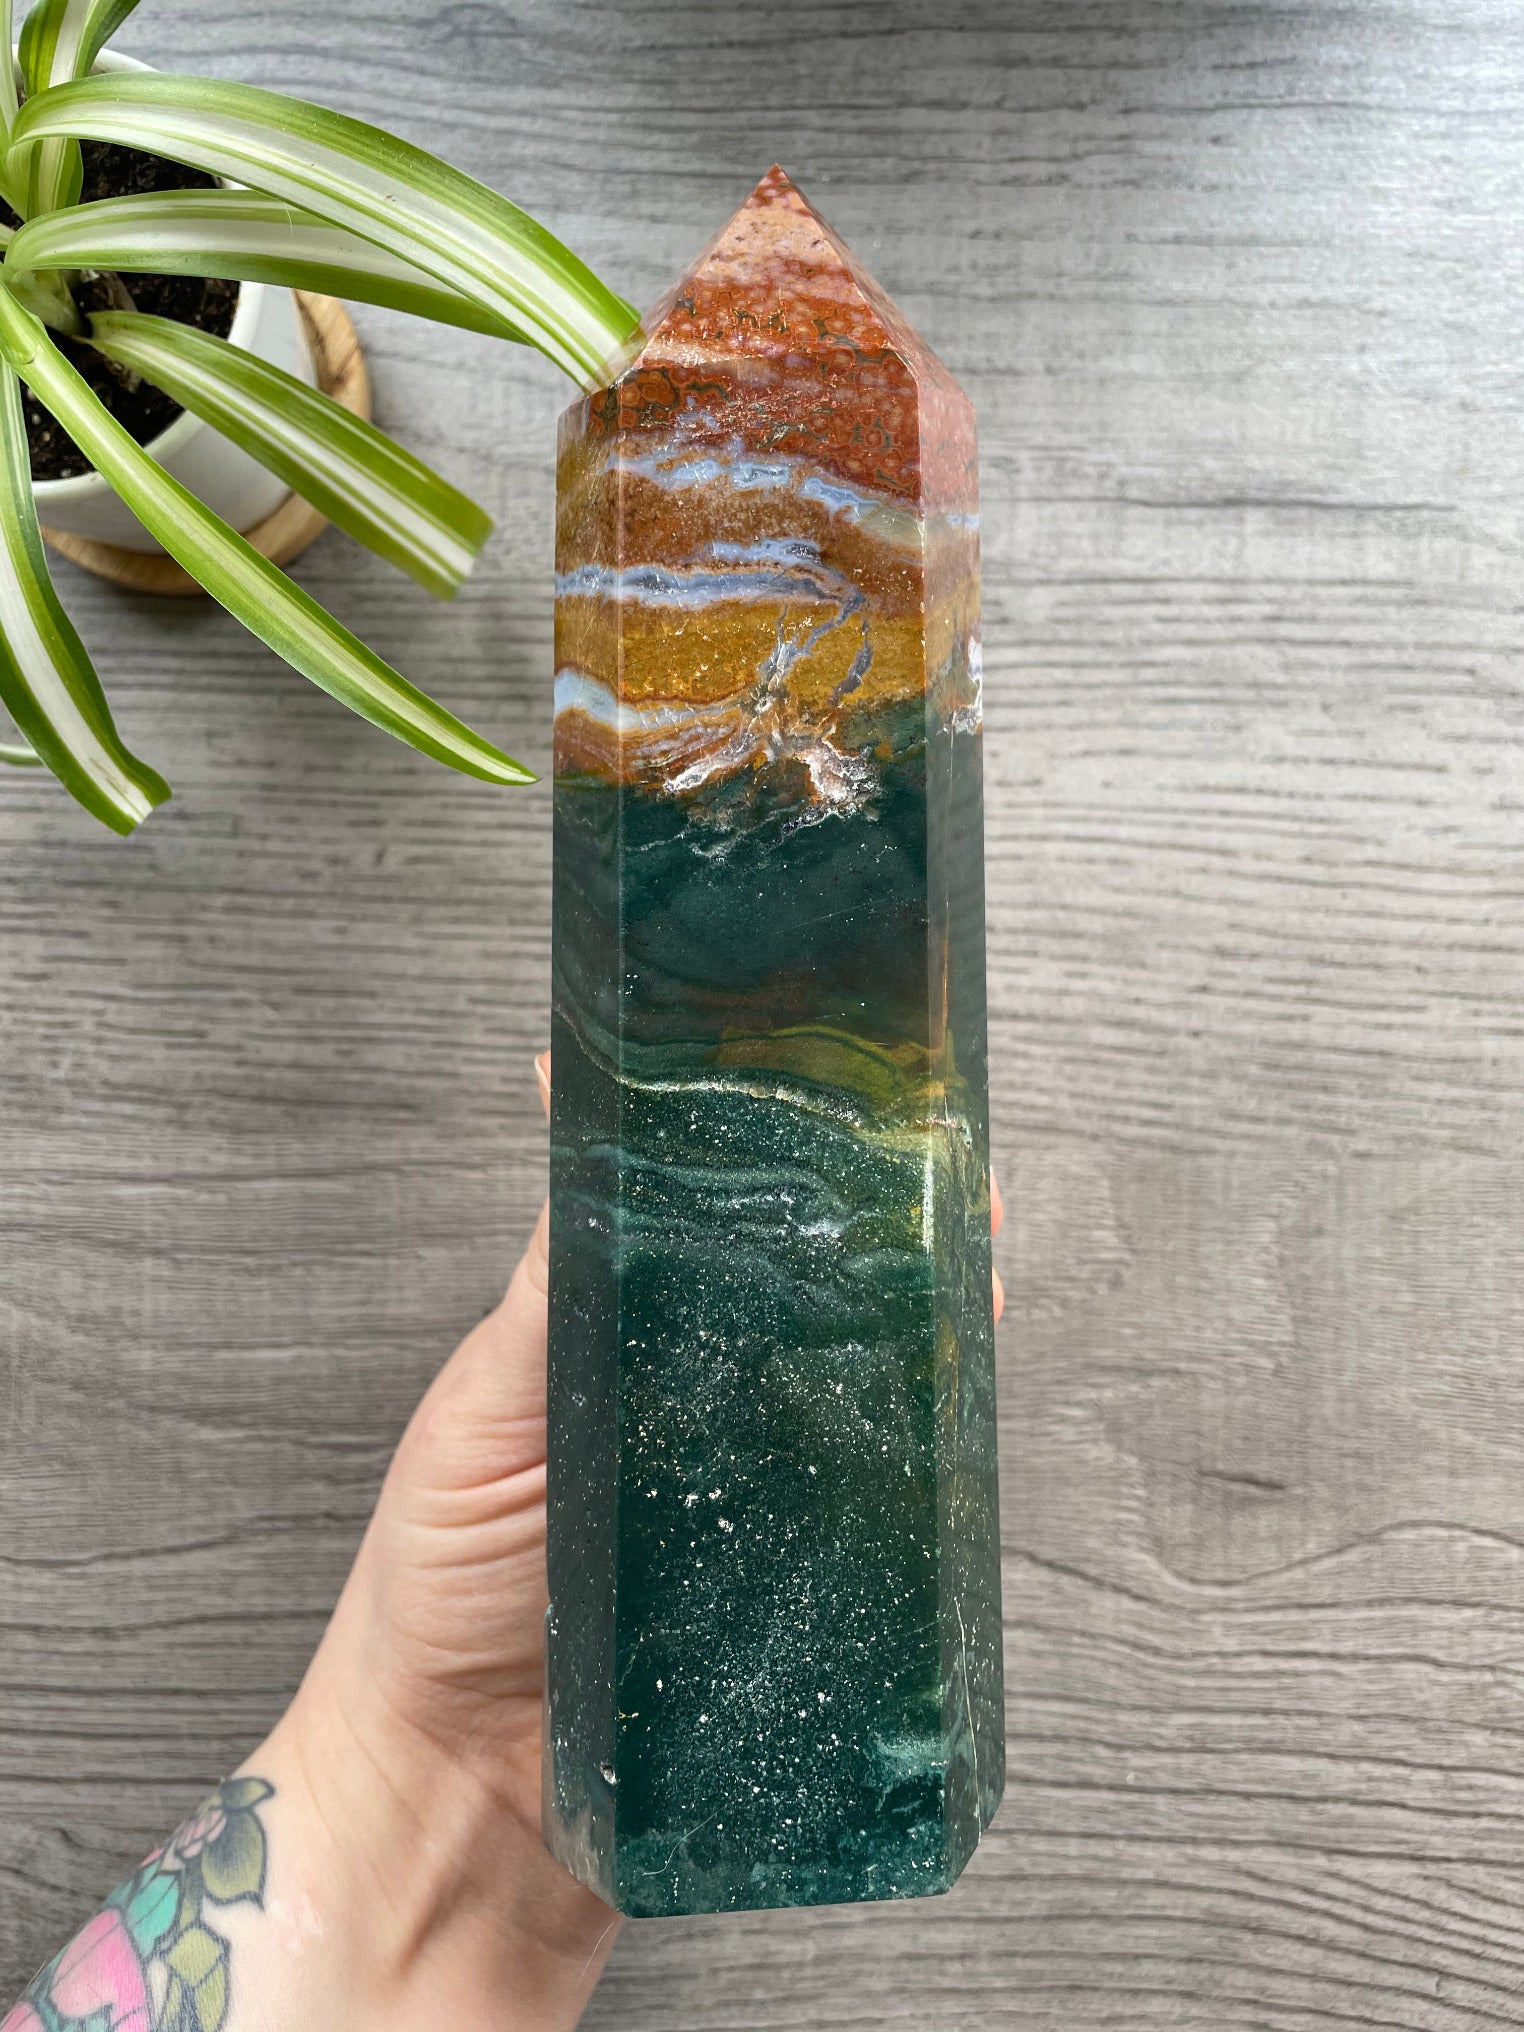 Pictured is a tower carved out of ocean jasper / river jasper.